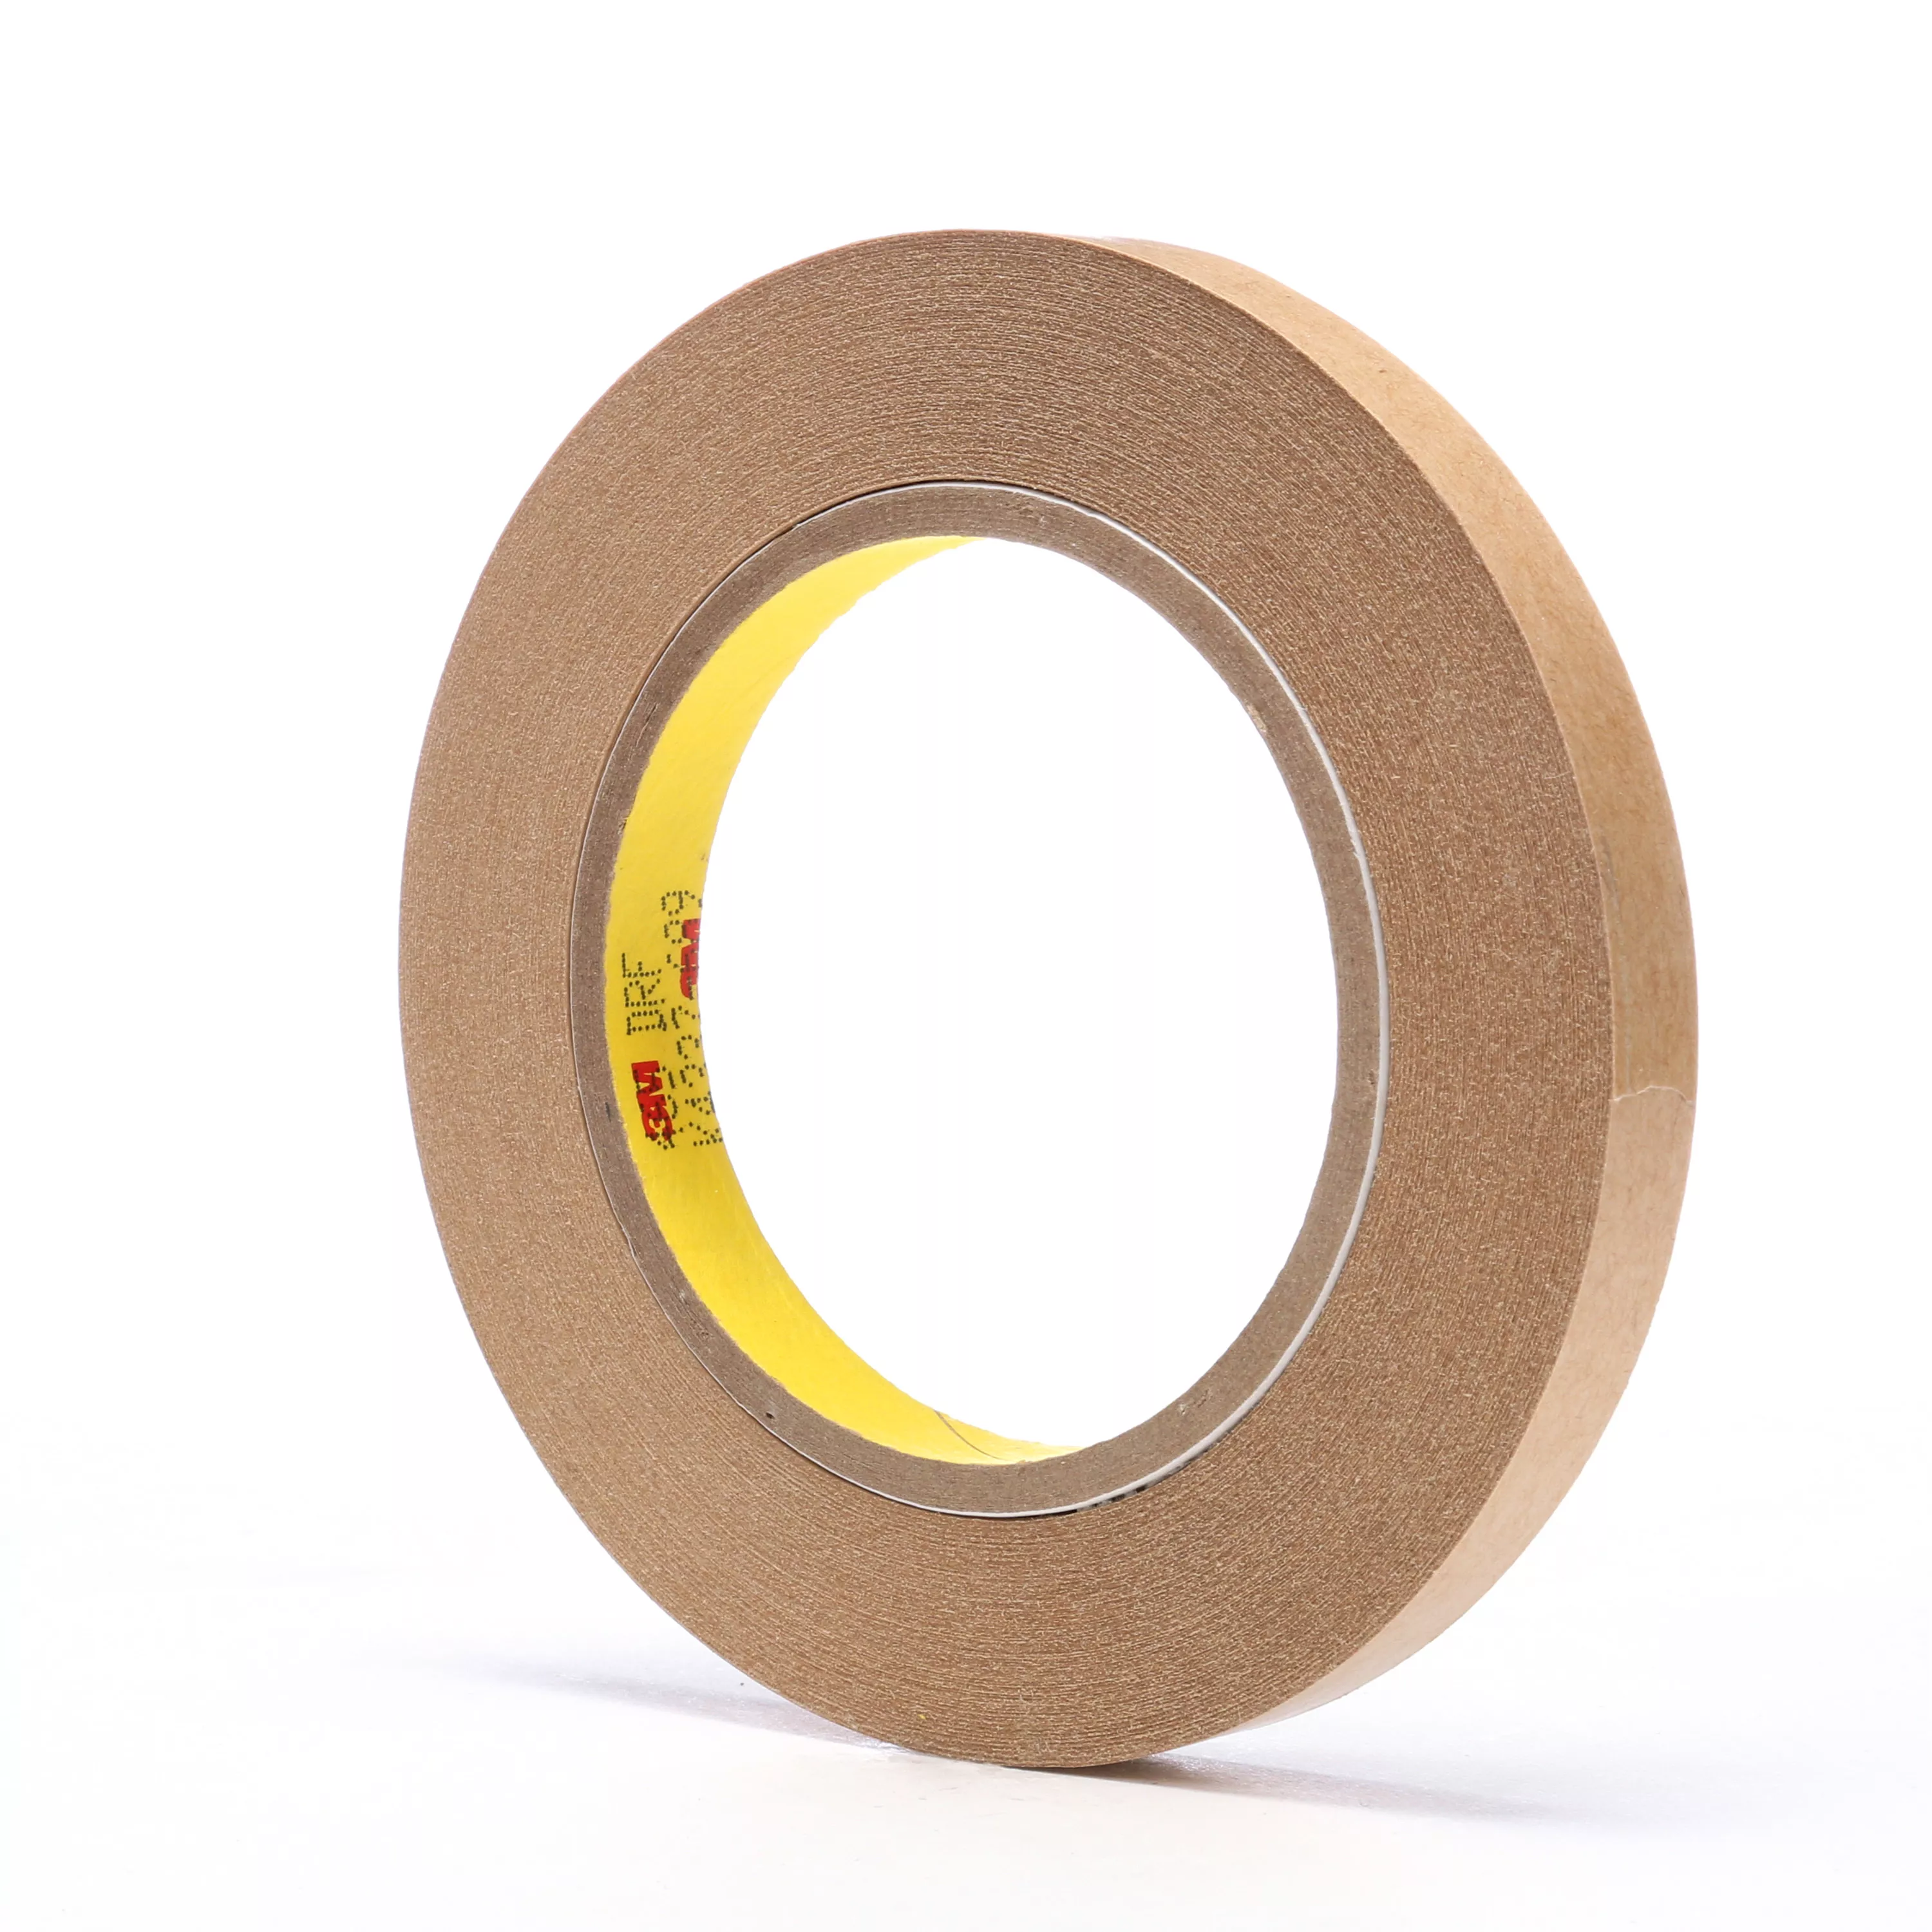 3M™ Adhesive Transfer Tape 465, Clear, 1/2 in x 60 yd, 2 mil, 72
Roll/Case